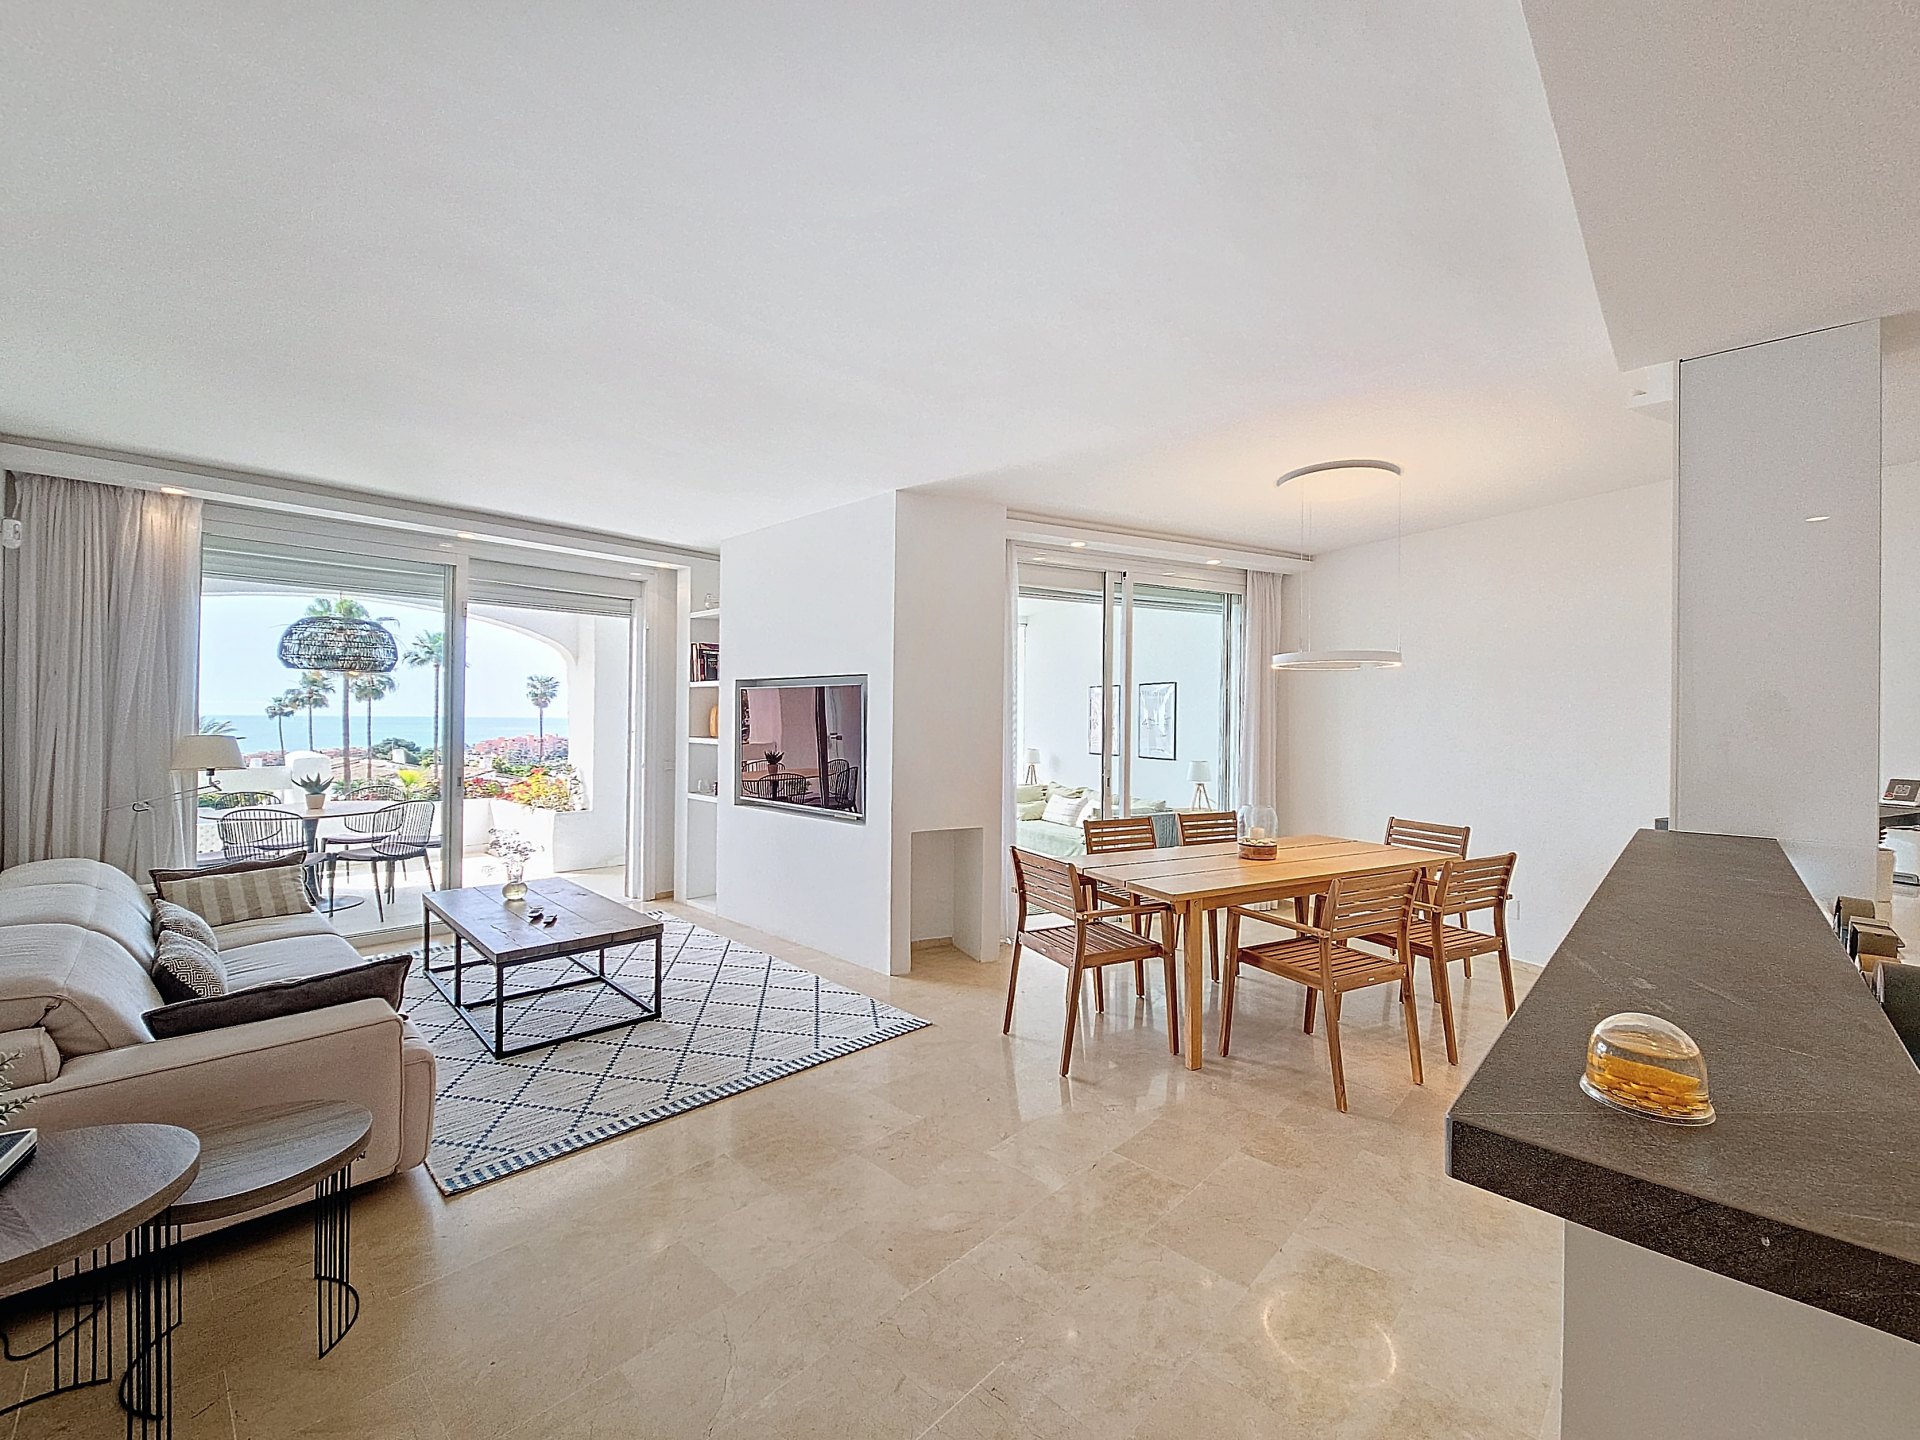 3 BEDROOMS FLAT WITH OPEN SEA AND GOLF VIEWS IN LA DUQUESA